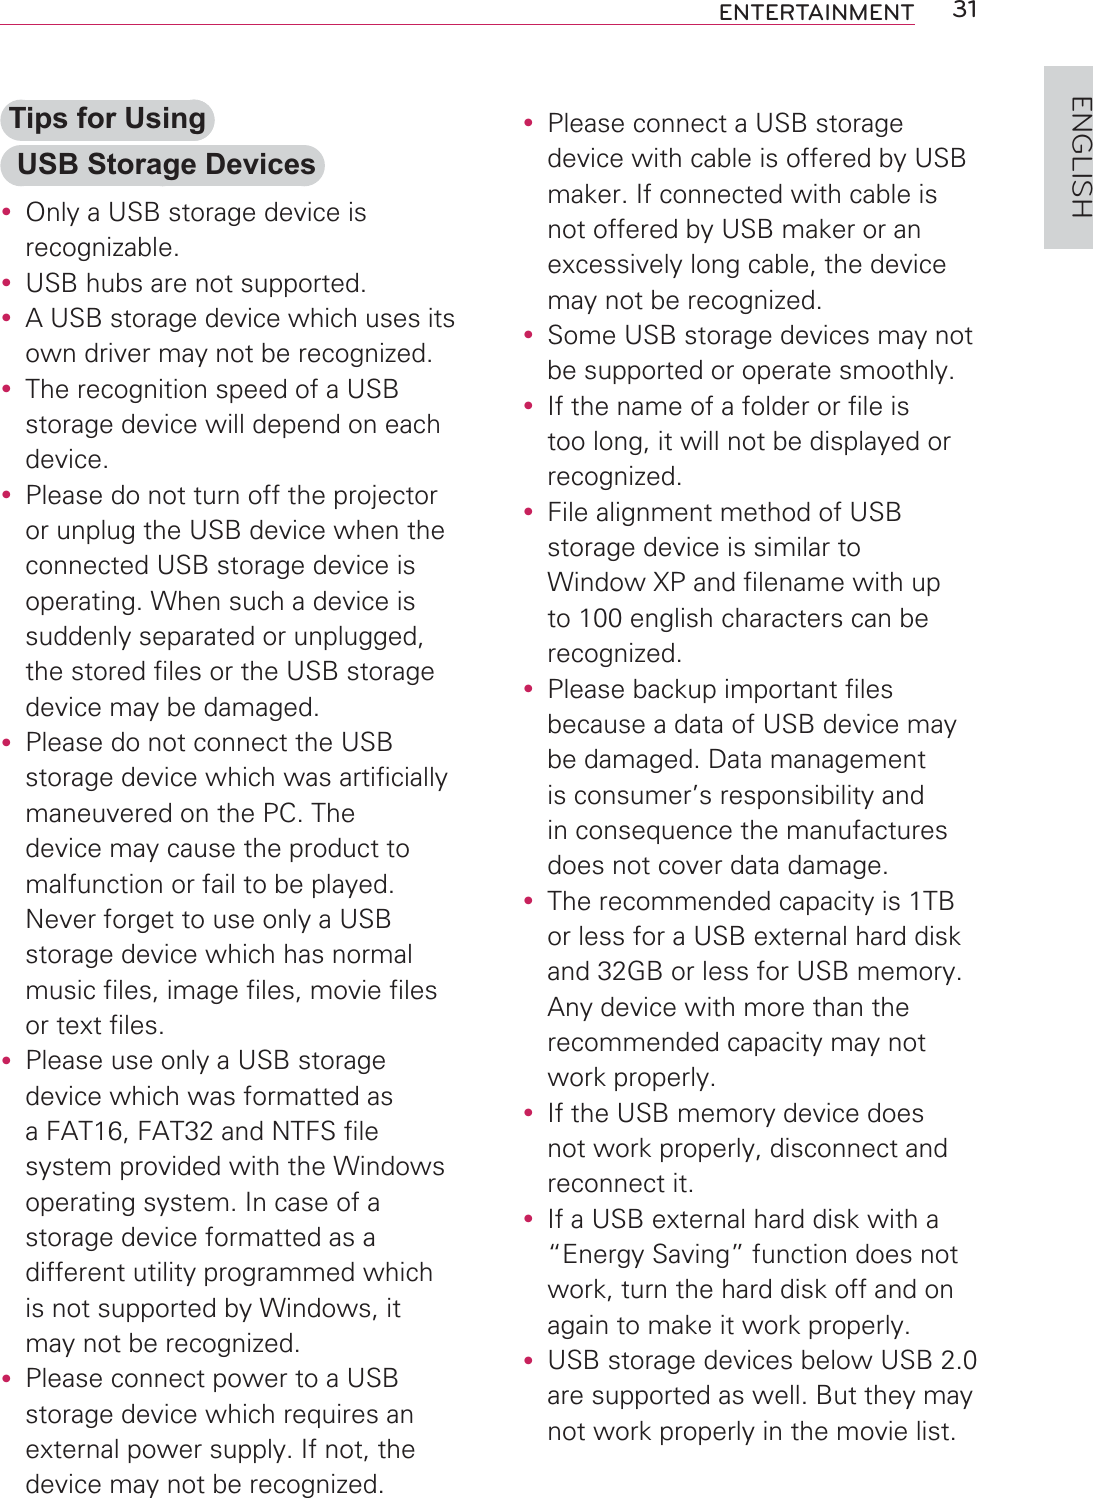 31ENTERTAINMENTENGLISHTips for Using USB Storage Devicesy Only a USB storage device is recognizable.y USB hubs are not supported.y A USB storage device which uses its own driver may not be recognized.y The recognition speed of a USB storage device will depend on each device.y Please do not turn off the projector or unplug the USB device when the connected USB storage device is operating. When such a device is suddenly separated or unplugged, the stored files or the USB storage device may be damaged.y Please do not connect the USB storage device which was artificially maneuvered on the PC. The device may cause the product to malfunction or fail to be played. Never forget to use only a USB storage device which has normal music files, image files, movie files or text files.y Please use only a USB storage device which was formatted as a FAT16, FAT32 and NTFS file system provided with the Windows operating system. In case of a storage device formatted as a different utility programmed which is not supported by Windows, it may not be recognized.y Please connect power to a USB storage device which requires an external power supply. If not, the device may not be recognized.y Please connect a USB storage device with cable is offered by USB maker. If connected with cable is not offered by USB maker or an excessively long cable, the device may not be recognized.y Some USB storage devices may not be supported or operate smoothly.y If the name of a folder or file is too long, it will not be displayed or recognized.y File alignment method of USB storage device is similar to Window XP and filename with up to 100 english characters can be recognized.y Please backup important files because a data of USB device may be damaged. Data management is consumer’s responsibility and in consequence the manufactures does not cover data damage.y The recommended capacity is 1TB or less for a USB external hard disk and 32GB or less for USB memory. Any device with more than the recommended capacity may not work properly.y If the USB memory device does not work properly, disconnect and reconnect it.y If a USB external hard disk with a “Energy Saving” function does not work, turn the hard disk off and on again to make it work properly.y USB storage devices below USB 2.0 are supported as well. But they may not work properly in the movie list.